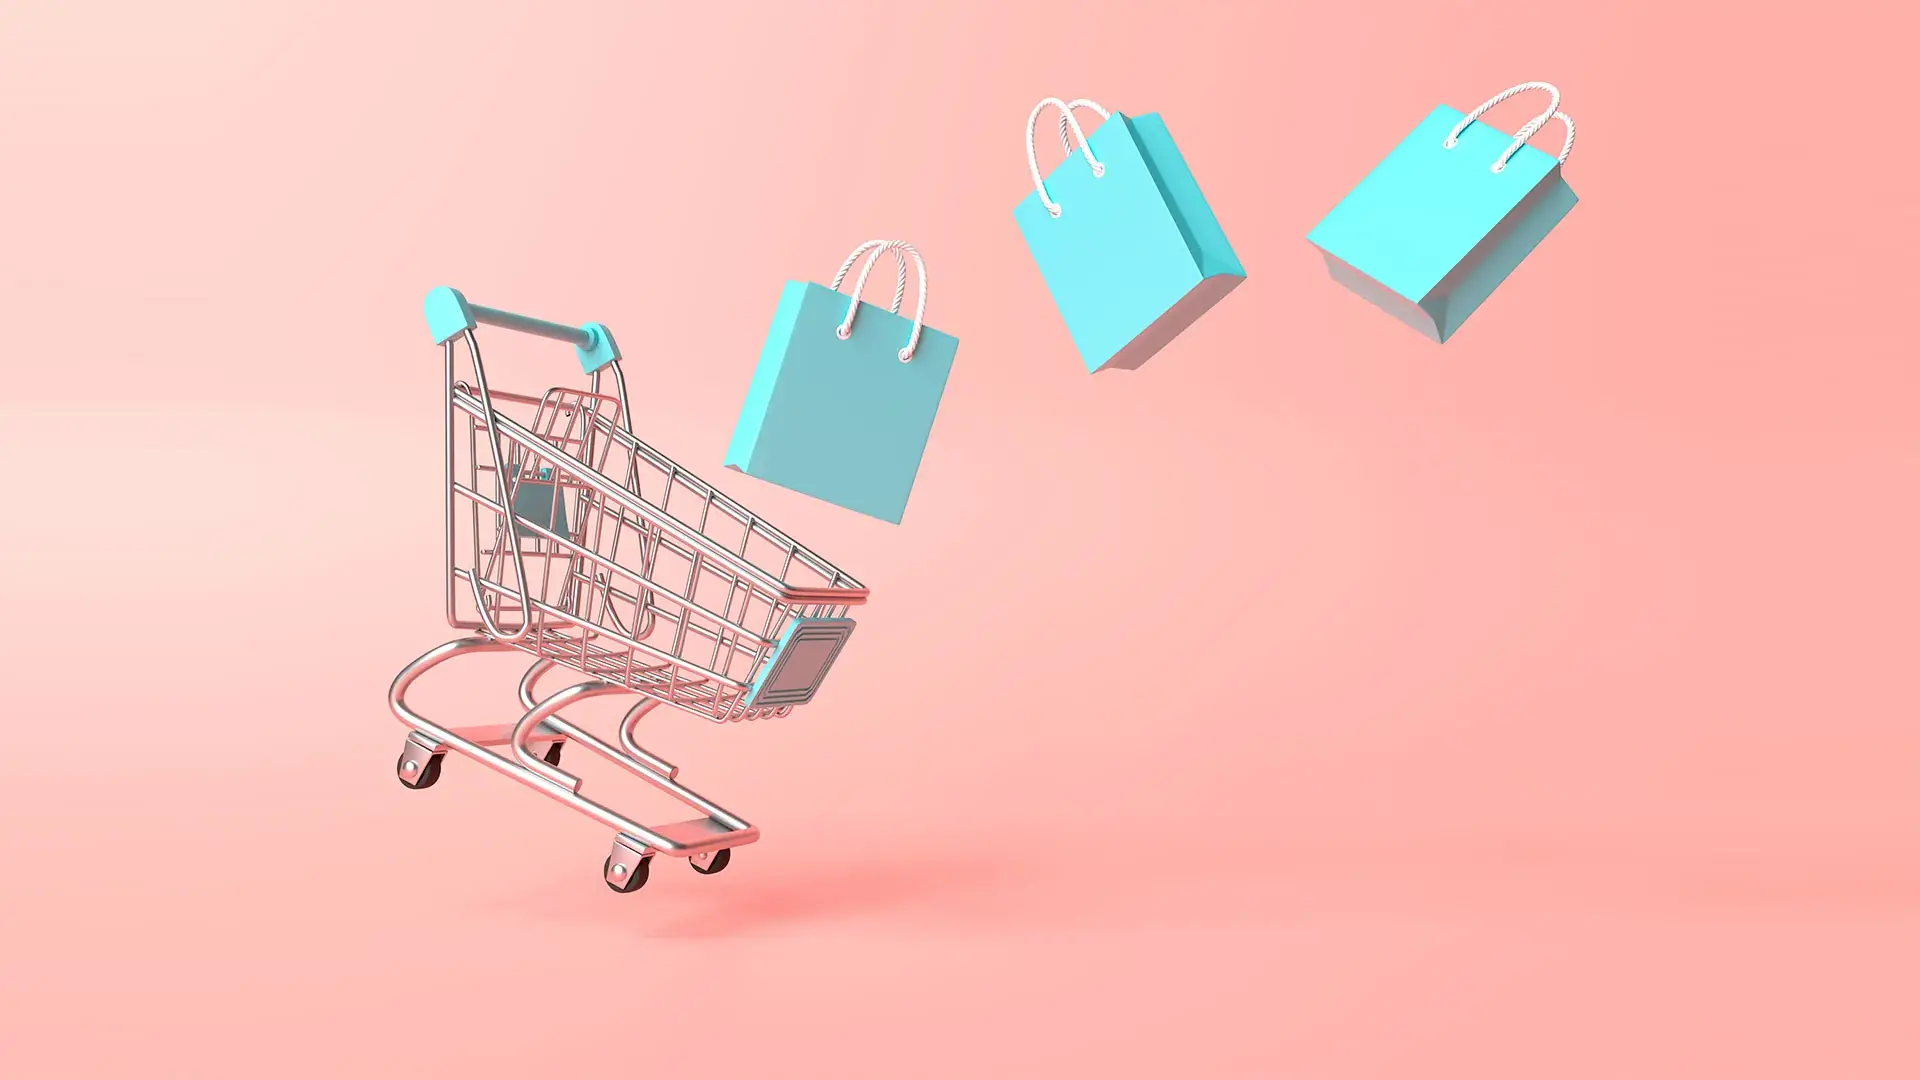 Shopping cart and bags on pink background.